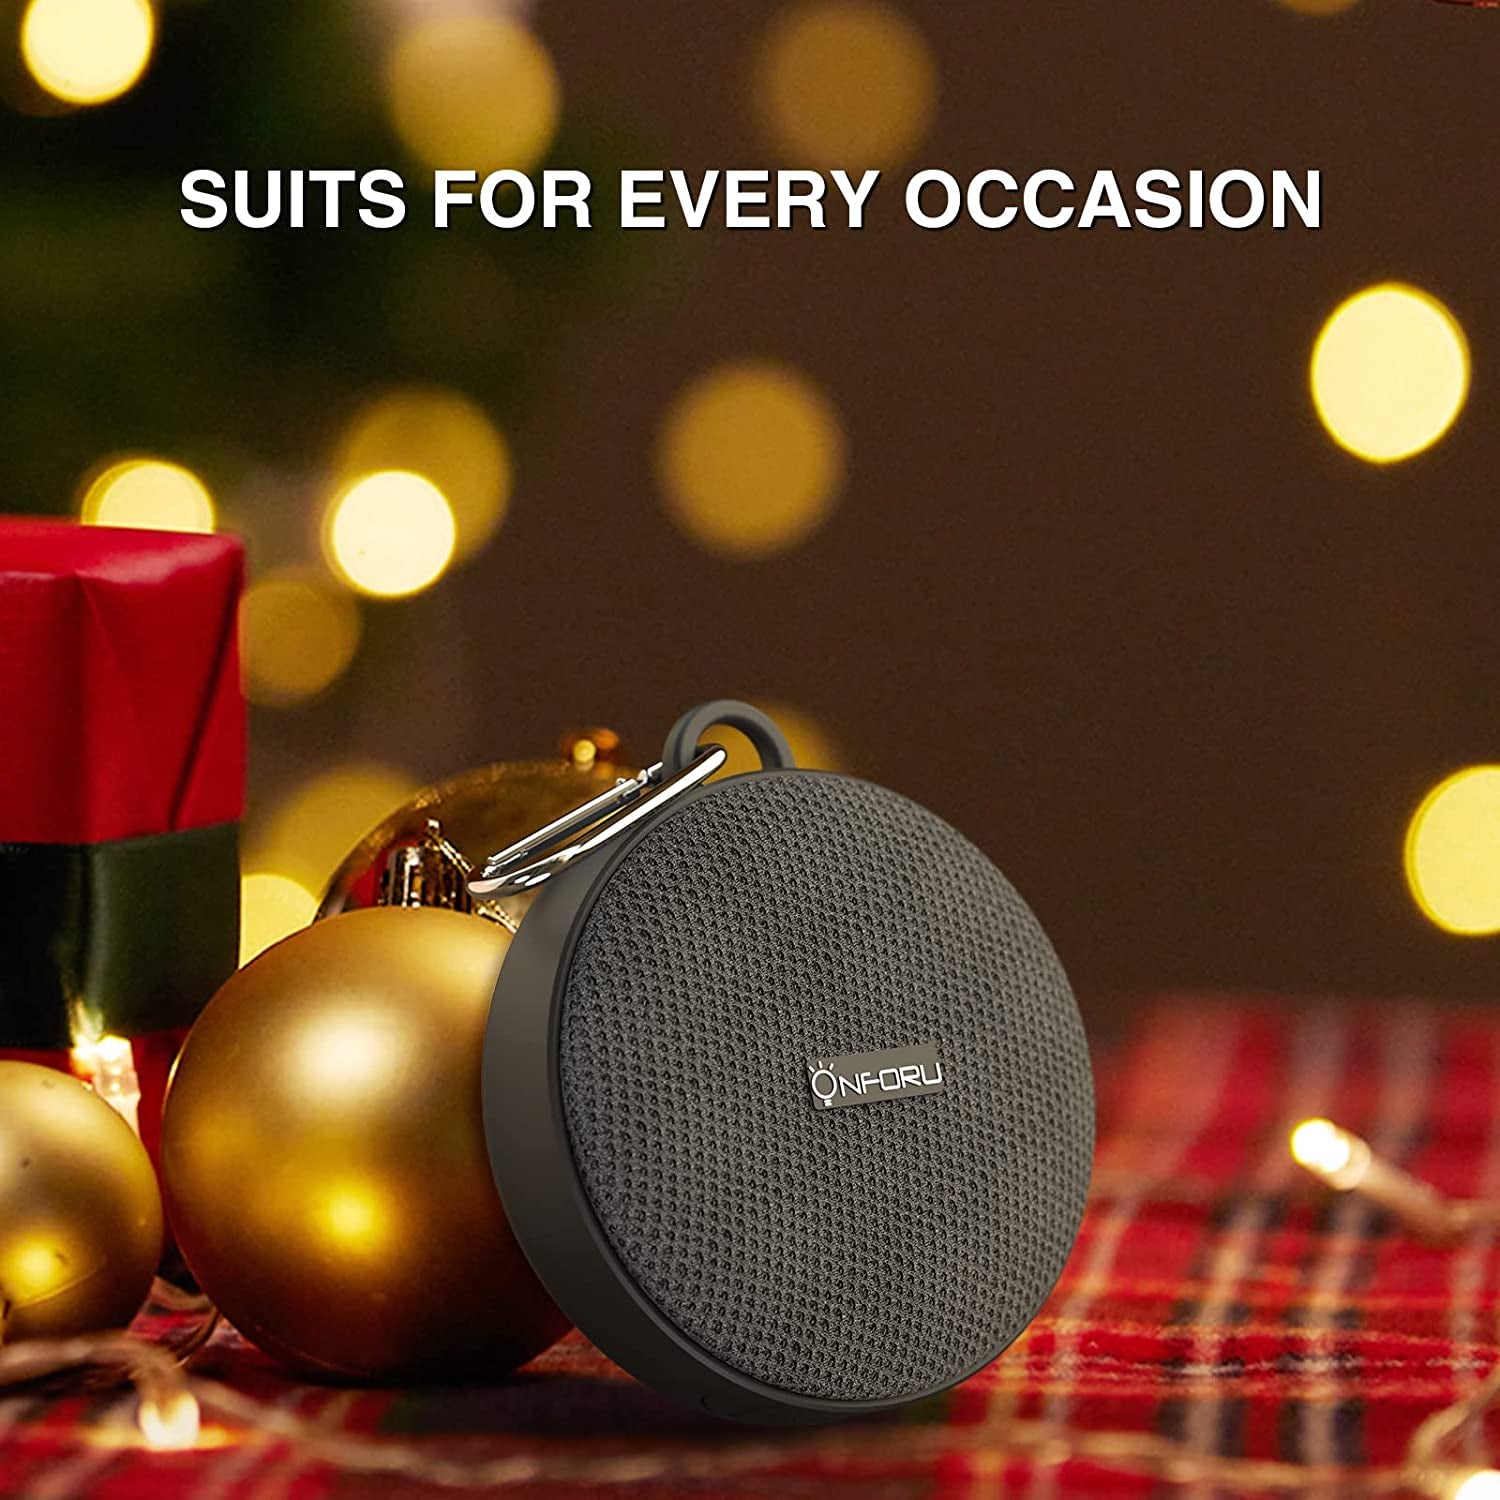  Portable Bluetooth Speaker for Bike, IP65Waterproof & Dustproof Mini Outdoor Speaker, Bluetooth 5.0 and 10h Play Time, Wireless Bicycle Speaker with Loud Sound for Riding, Hiking and Camping